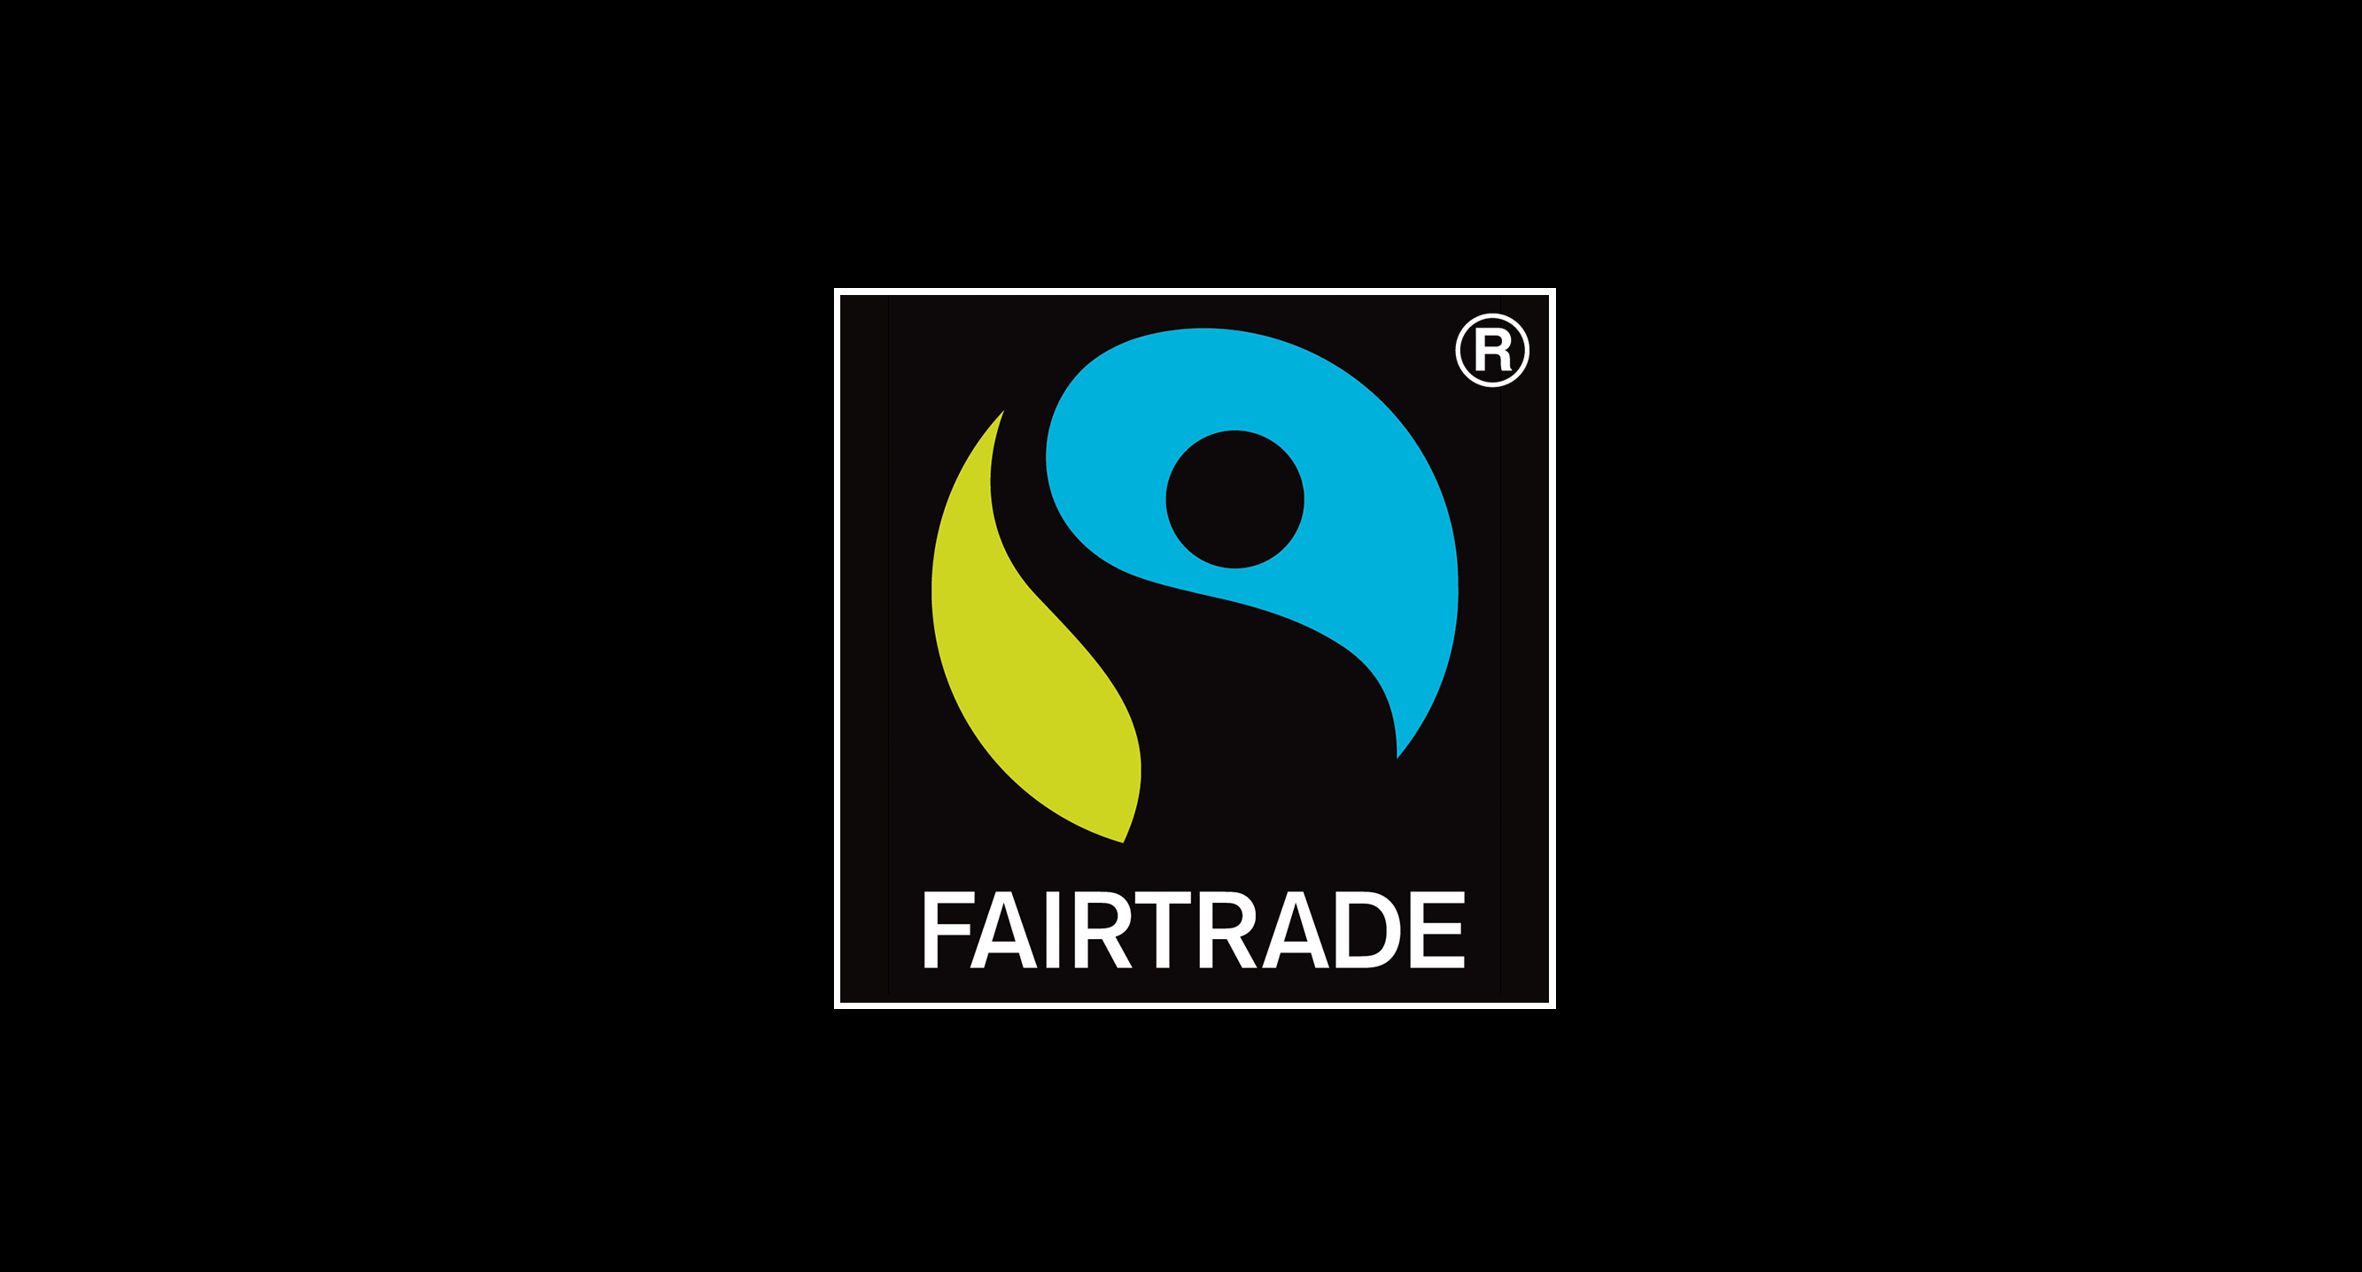 In defence of Fairtrade…